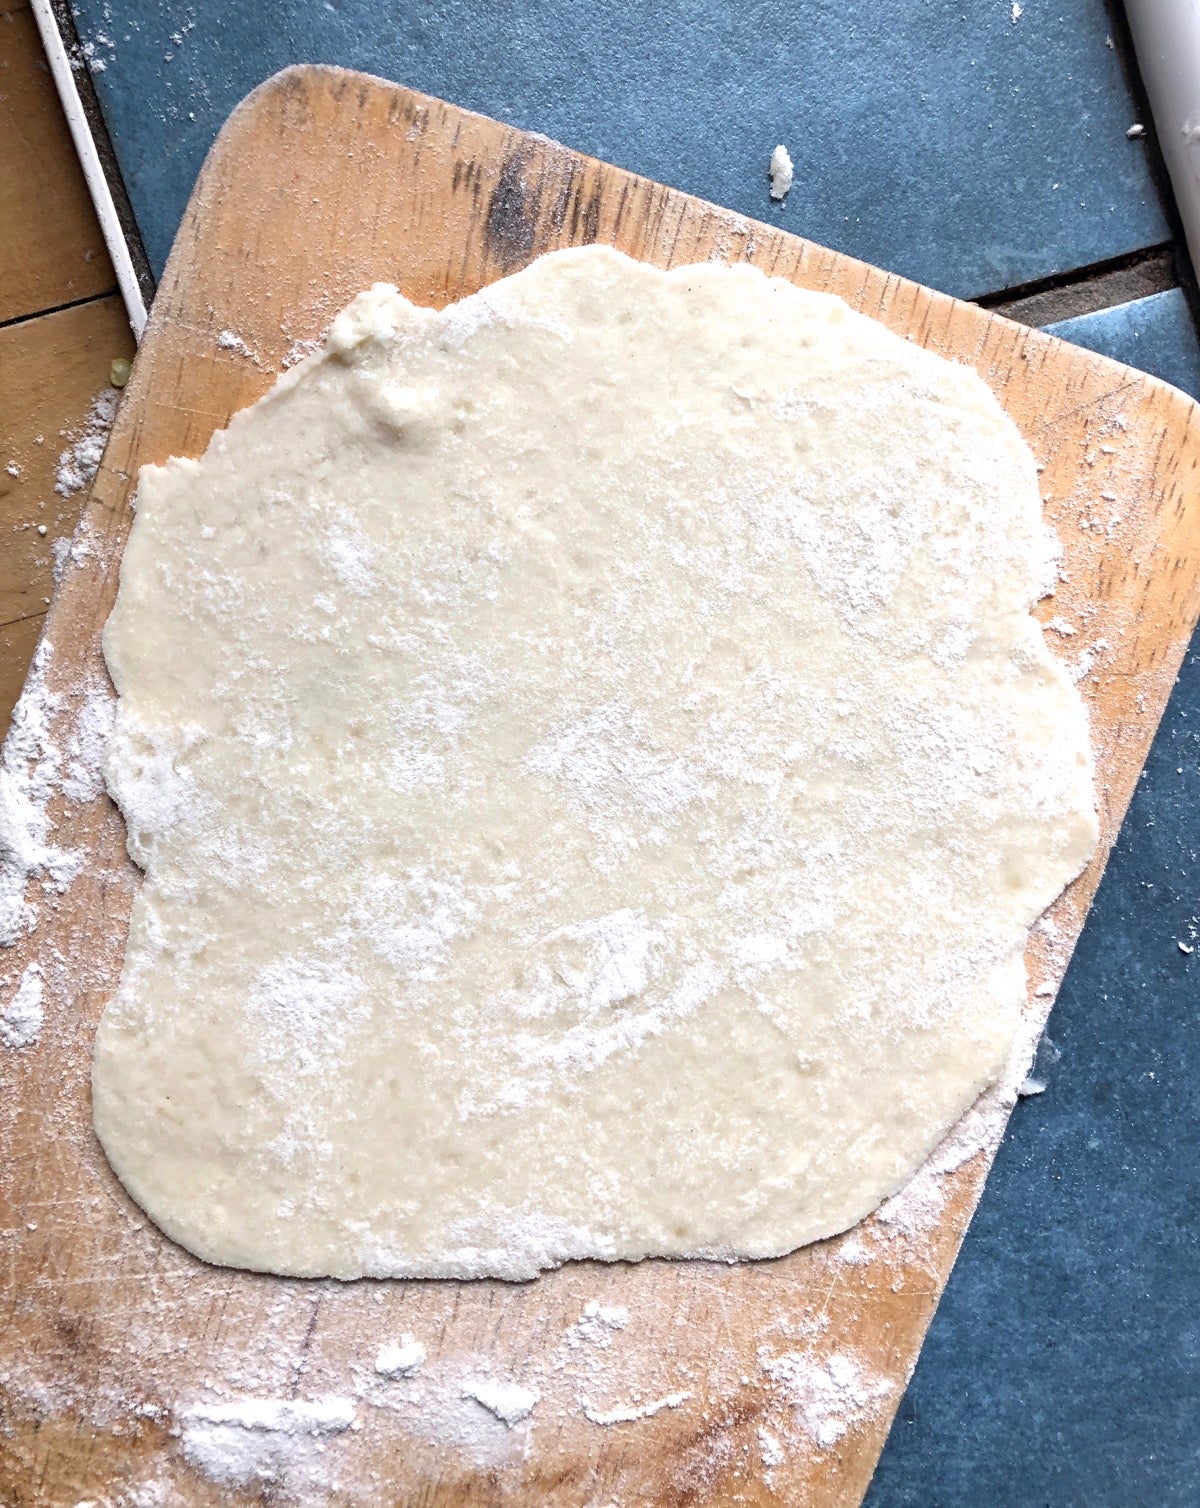 Rolled -out lefse on a floured cutting board, ready to transfer to a frying pan to cook.